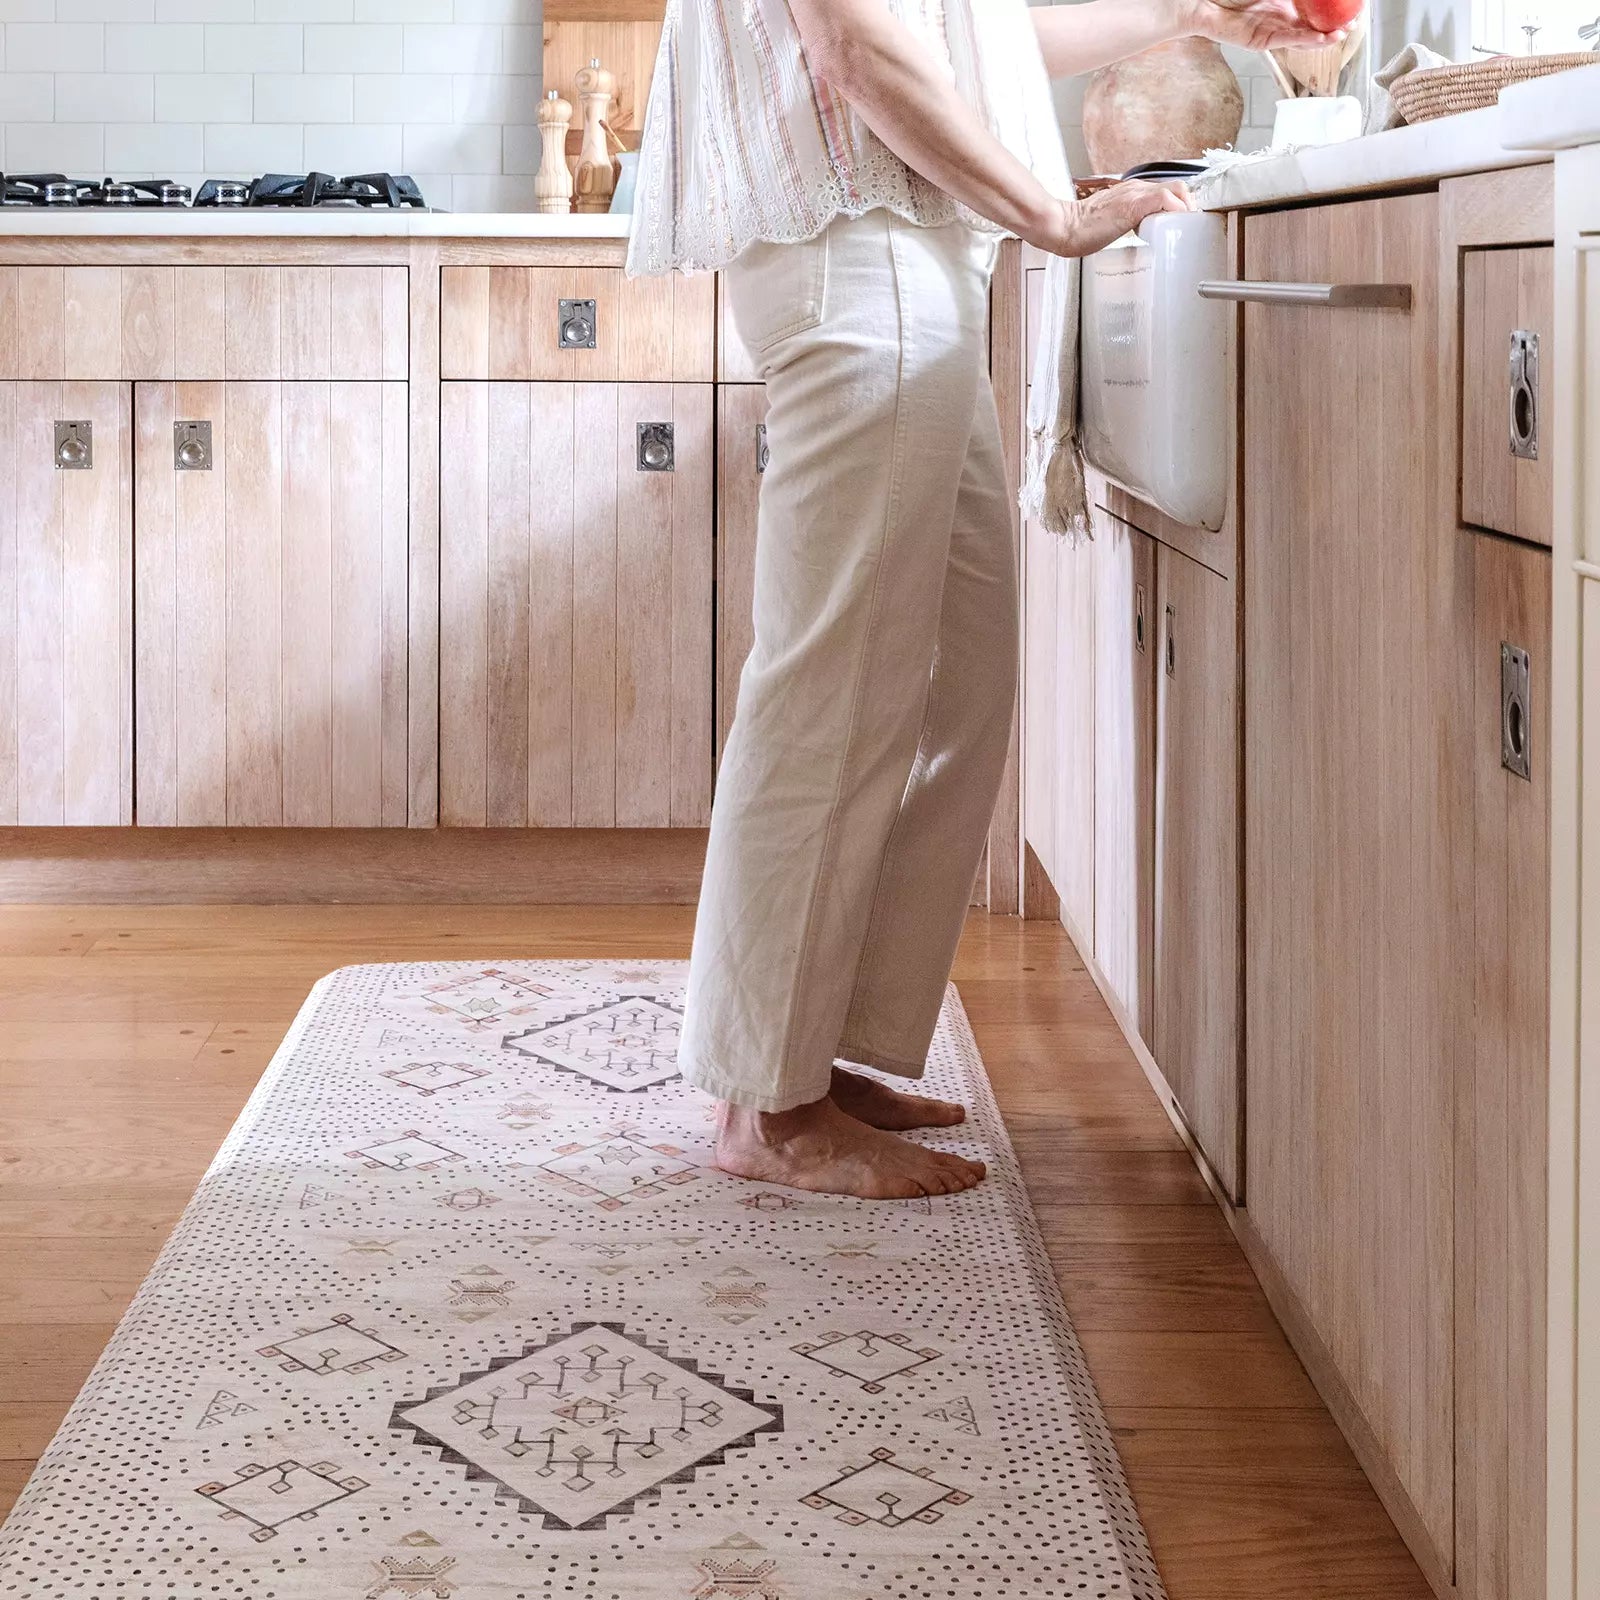 Nama Standing Mat in Ula Oat neutral boho print. Anti-fatigue kitchen mat shown in kitchen with woman washing dishes at the sink.